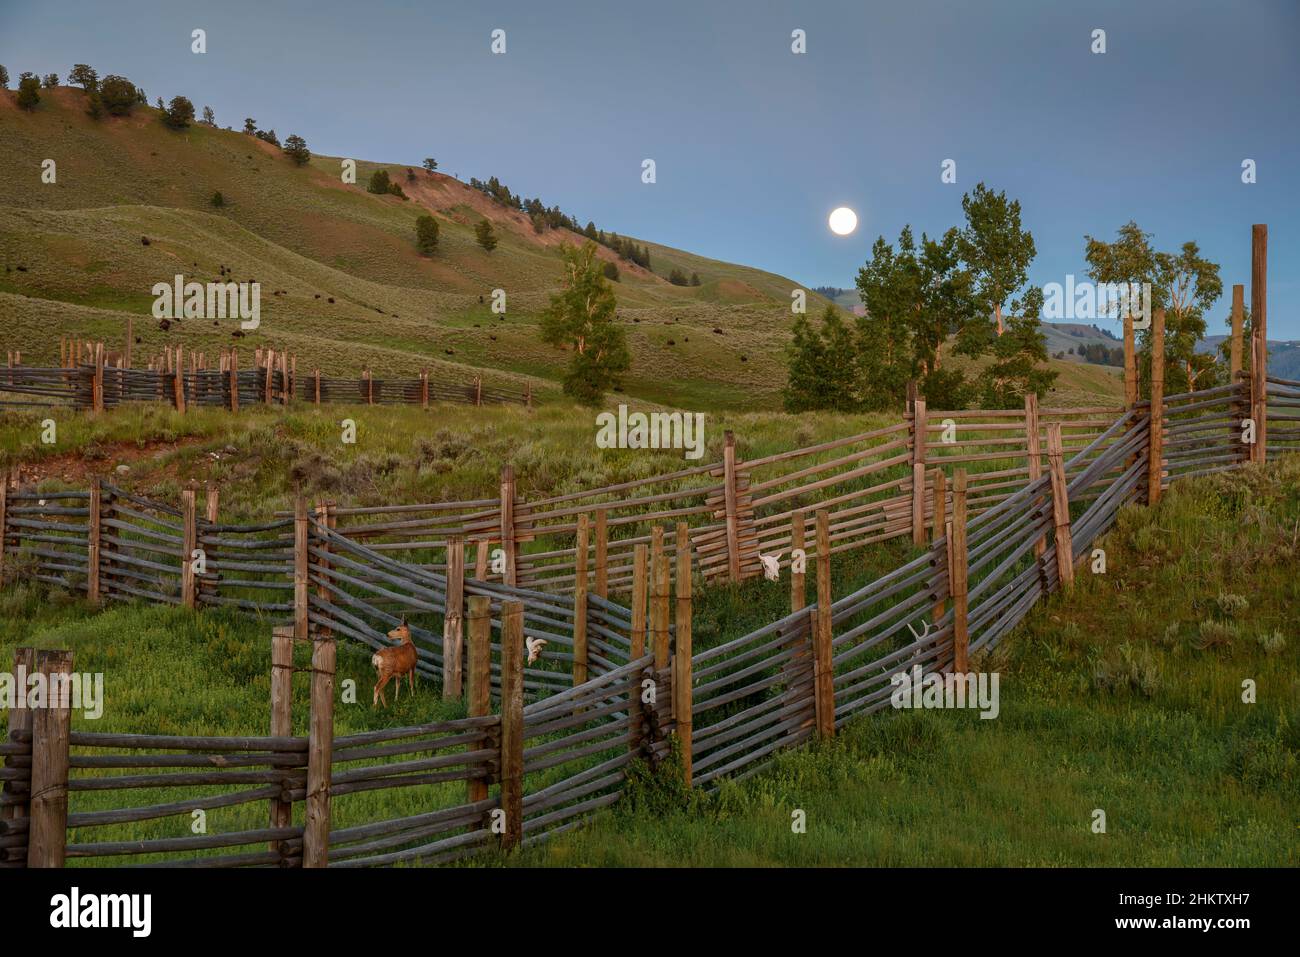 Full moon rising and a deer in the corrals at Lamar Buffalo Ranch, Yellowstone National Park, Wyoming. Stock Photo